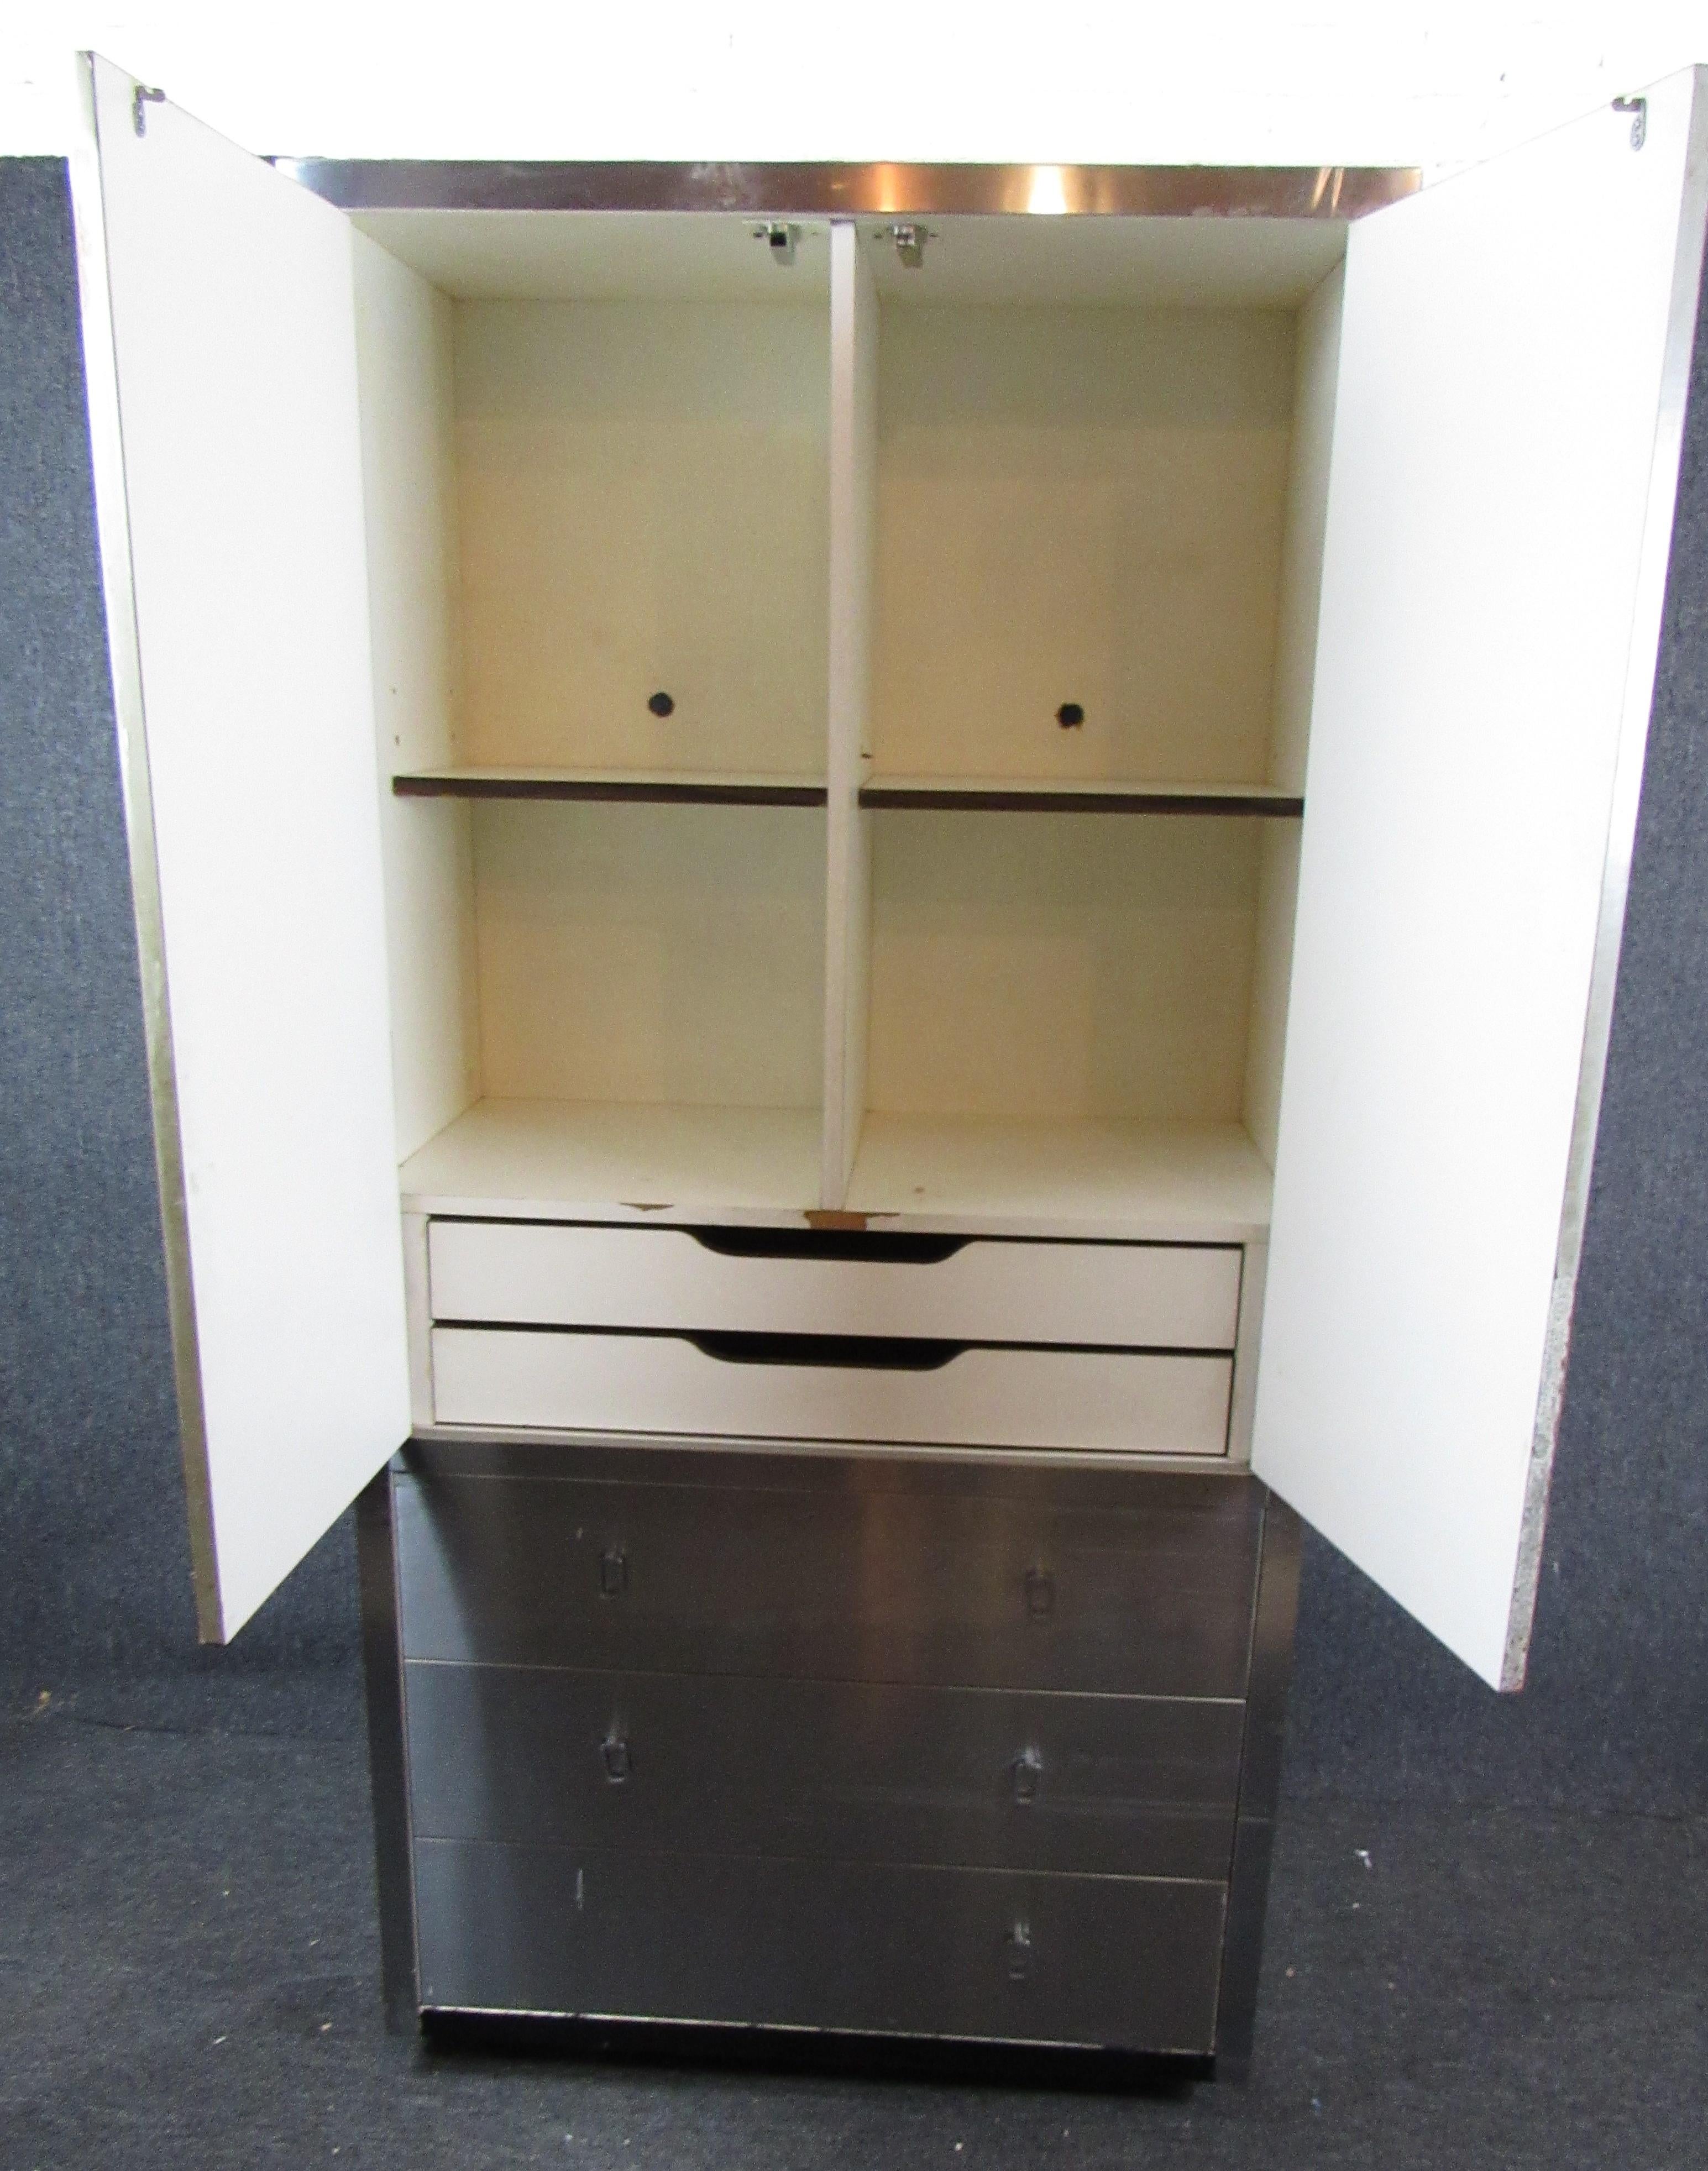 Large plated armoire with drawers and cabinet storage. Attractive strips of chrome and black color.
Please confirm location NY or NJ.